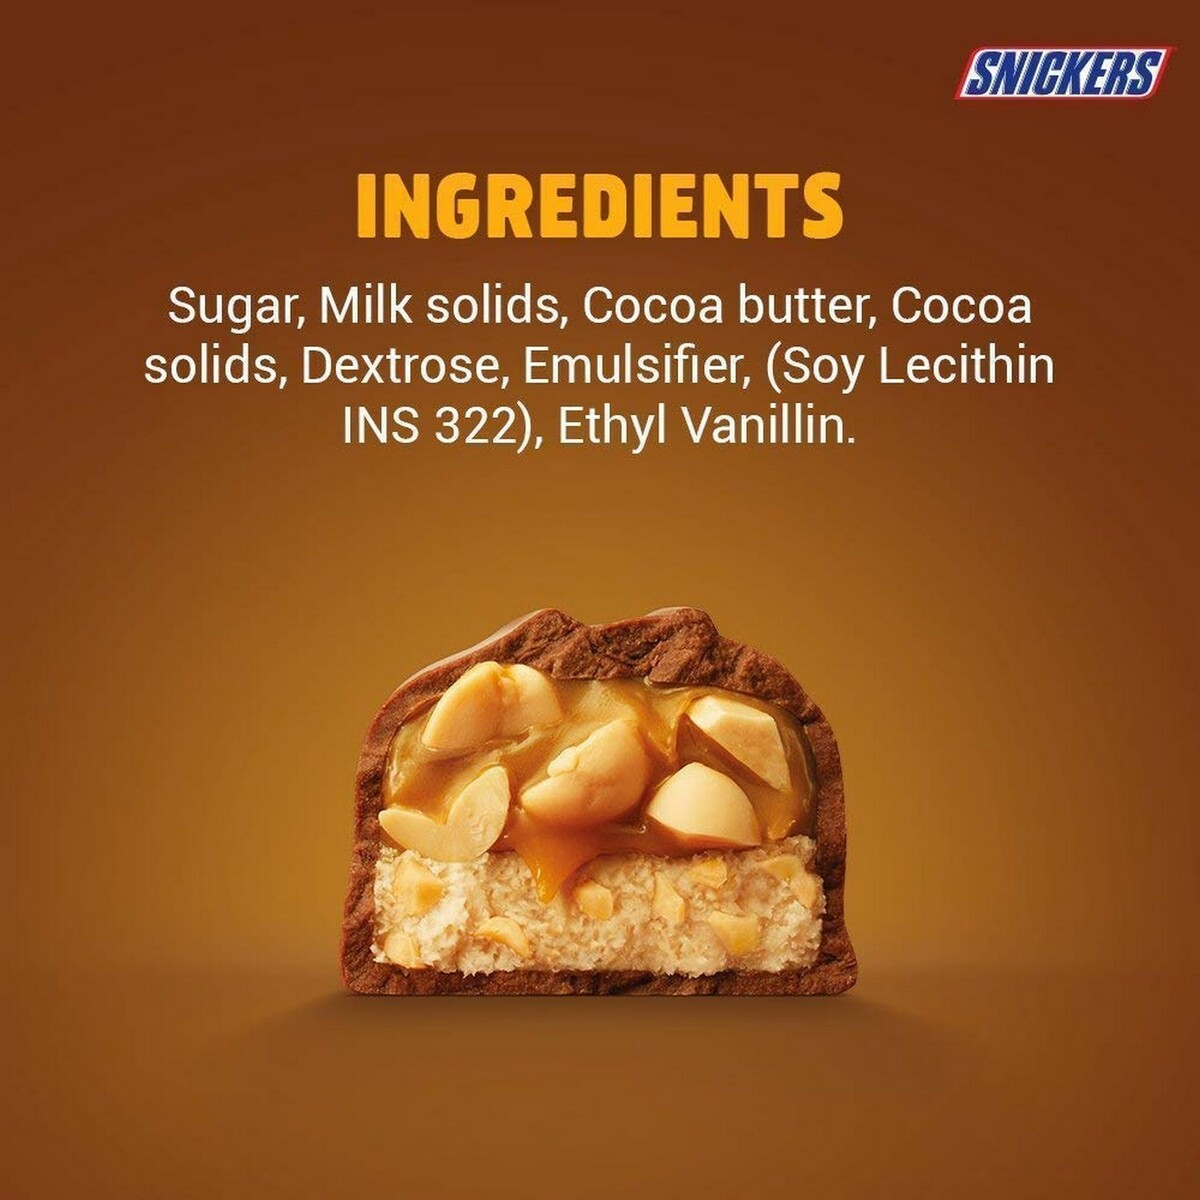 Snickers Chocolate 25g